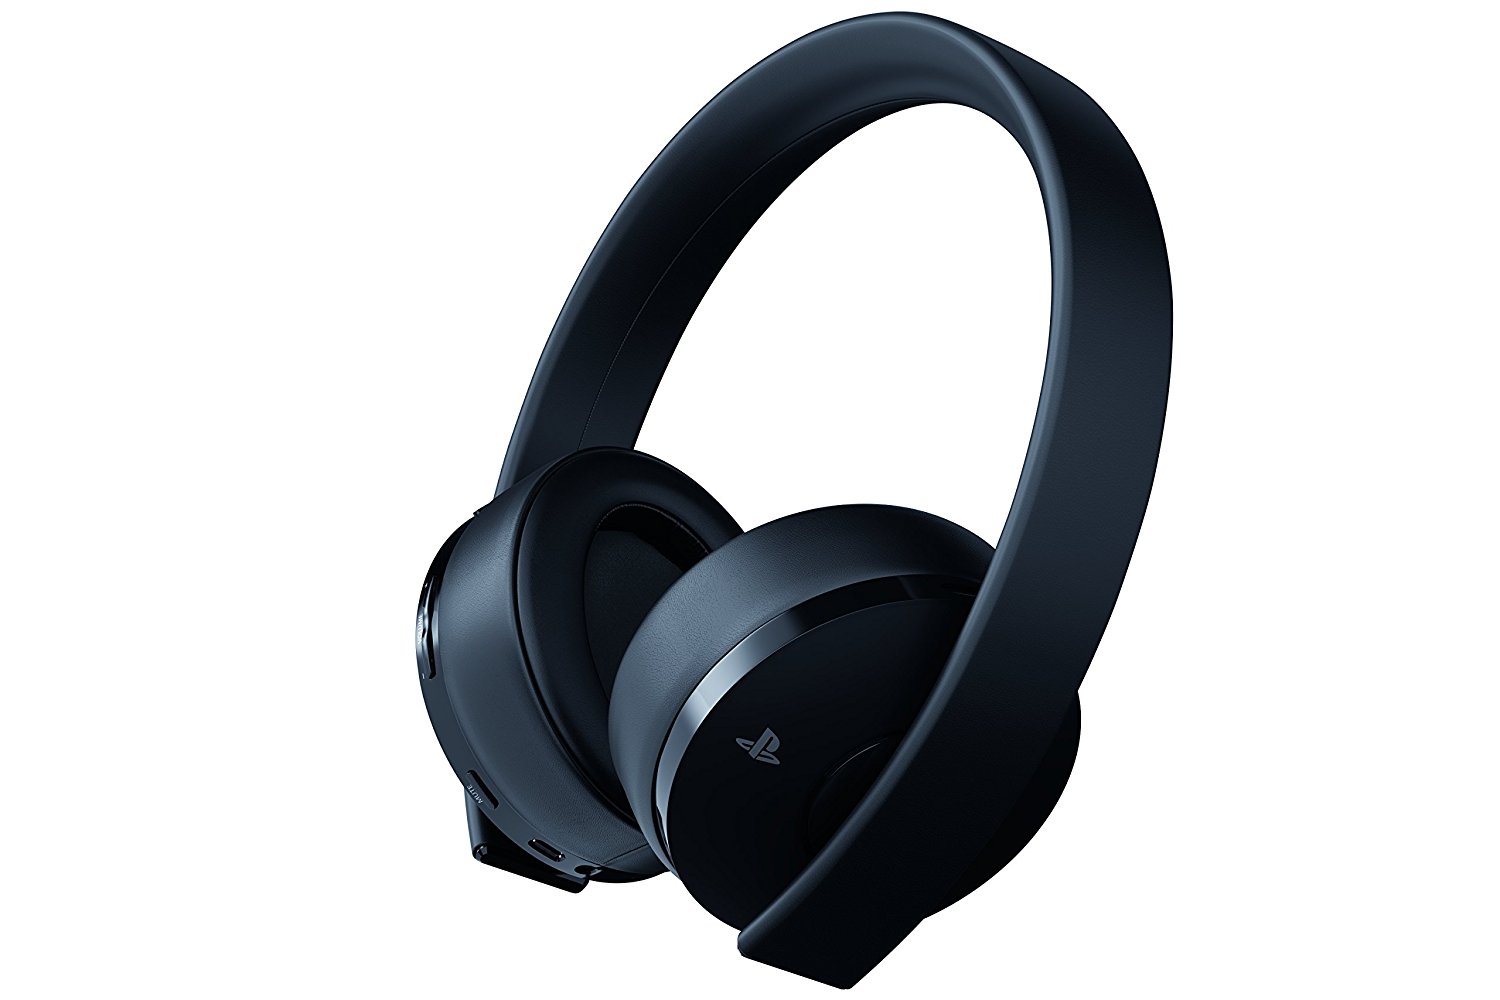 playstation new gold wireless headset